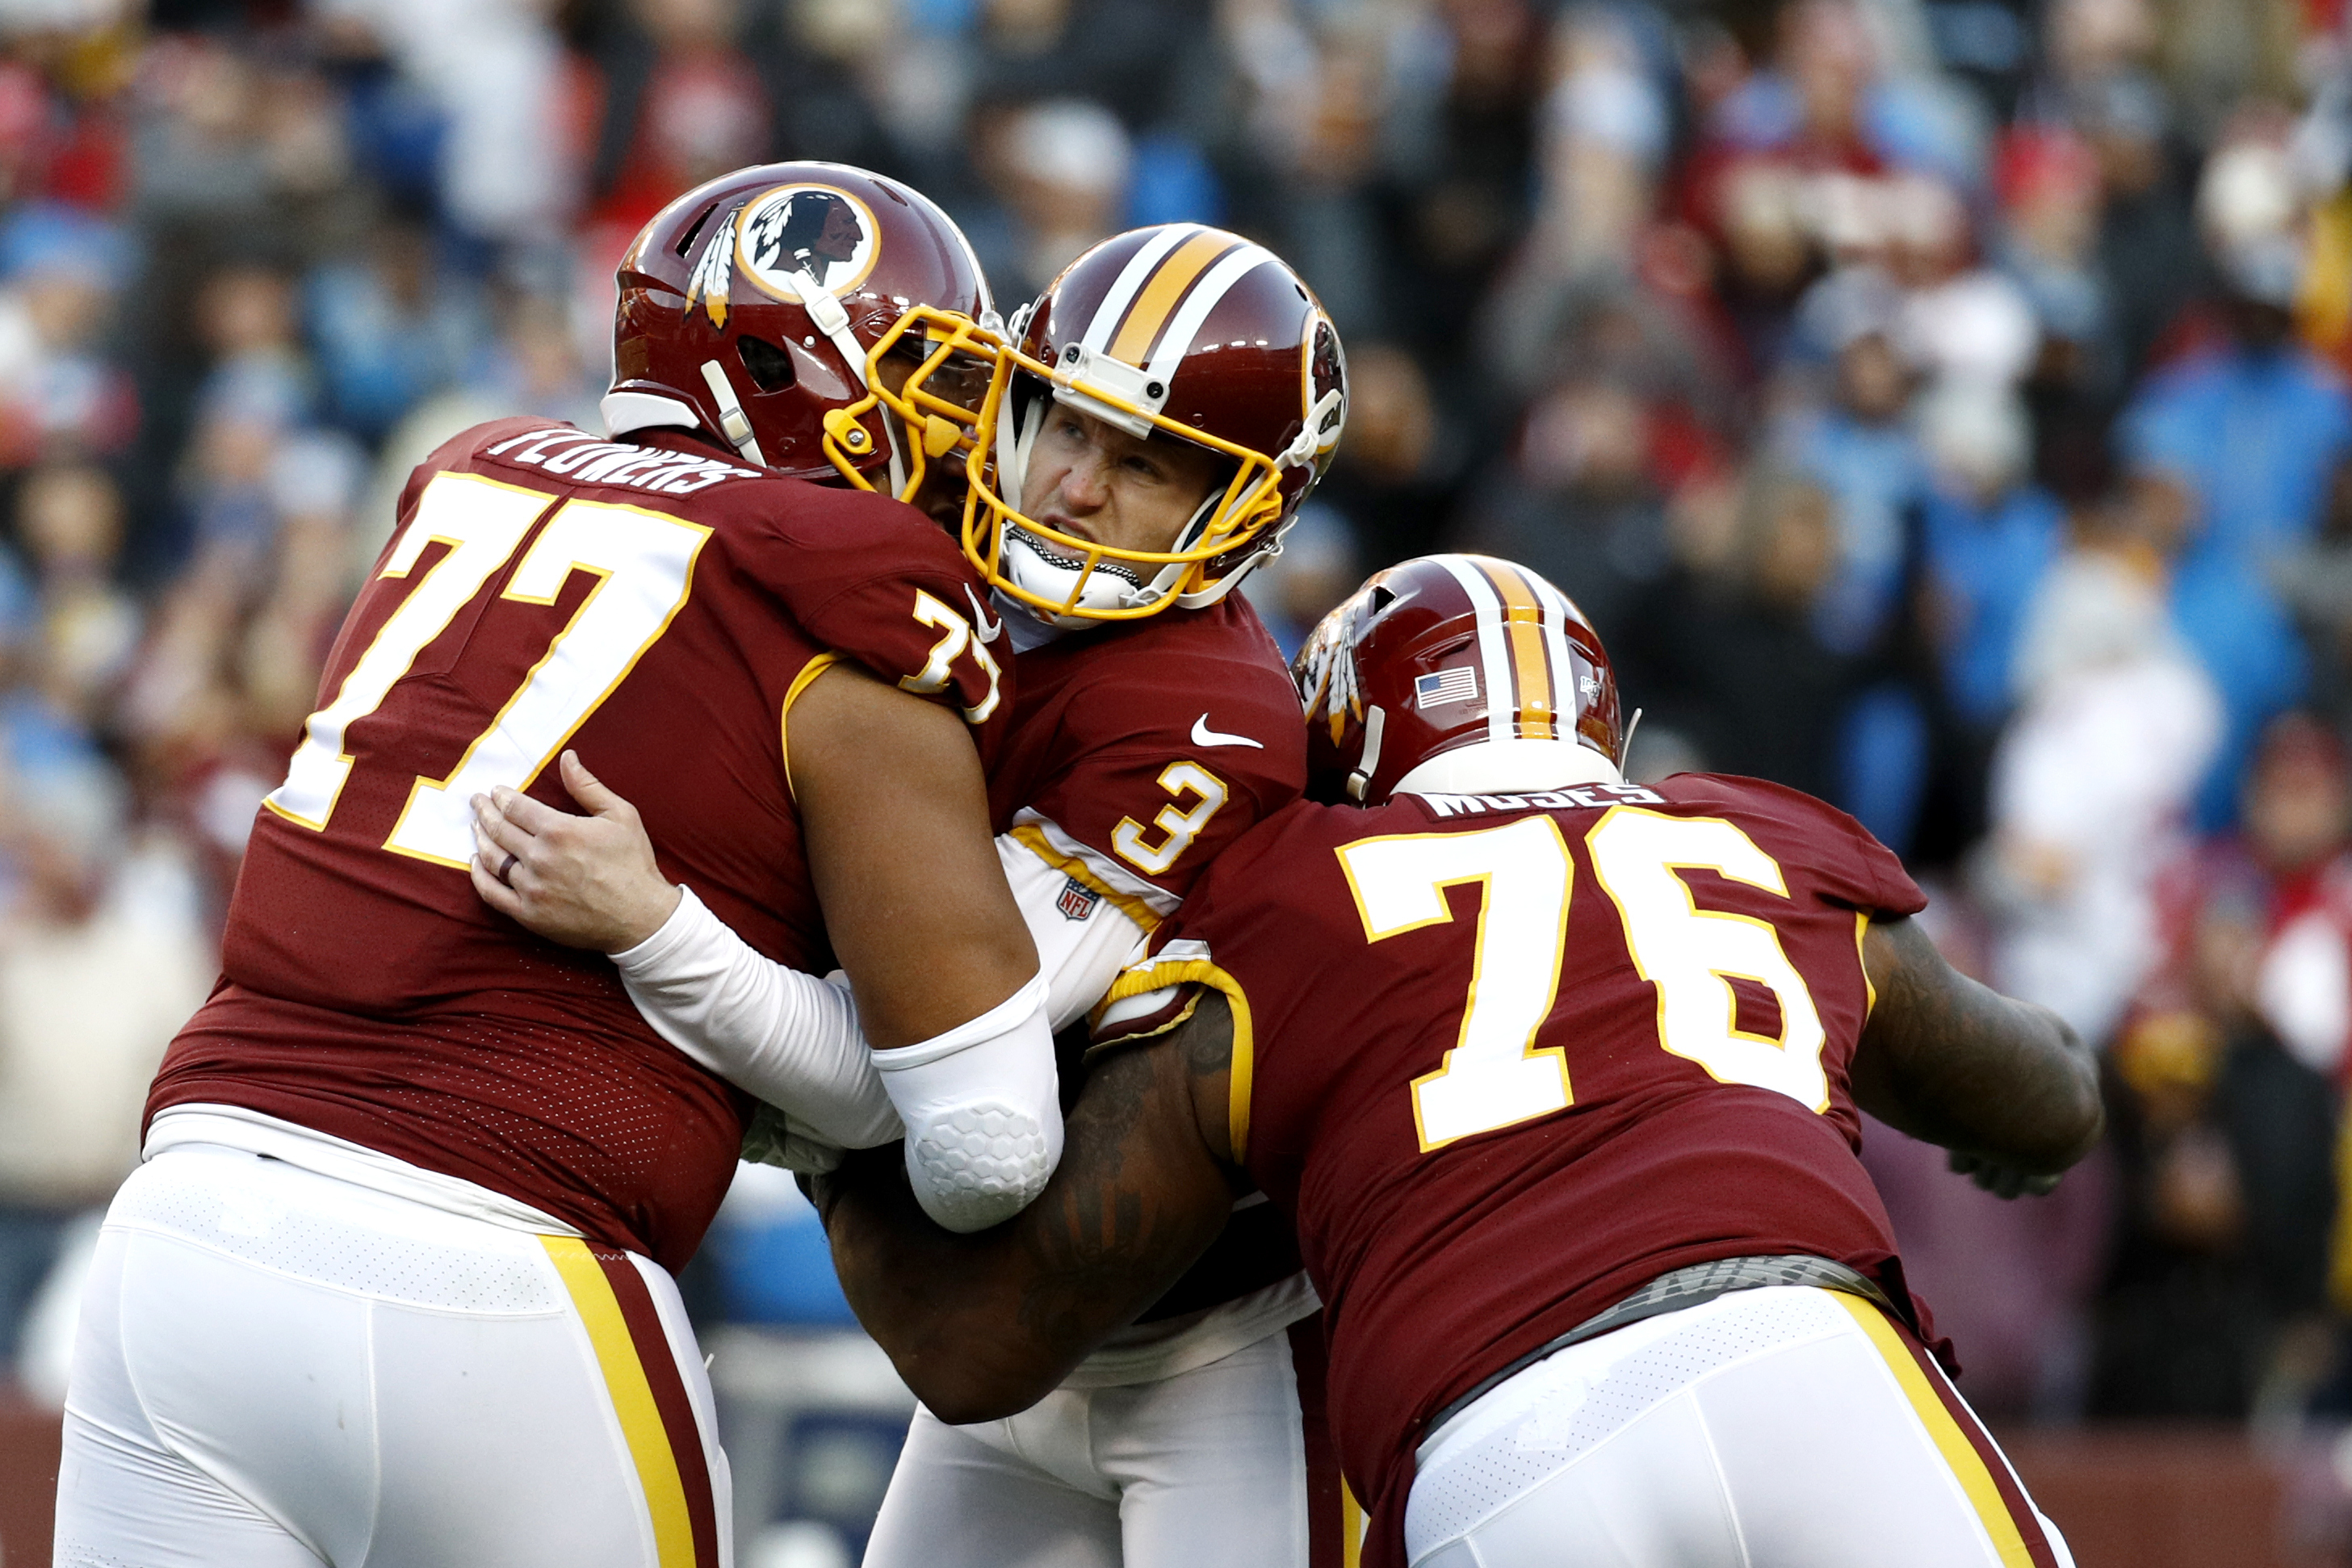 Redskins enjoy 2nd win, need better with Panthers up next